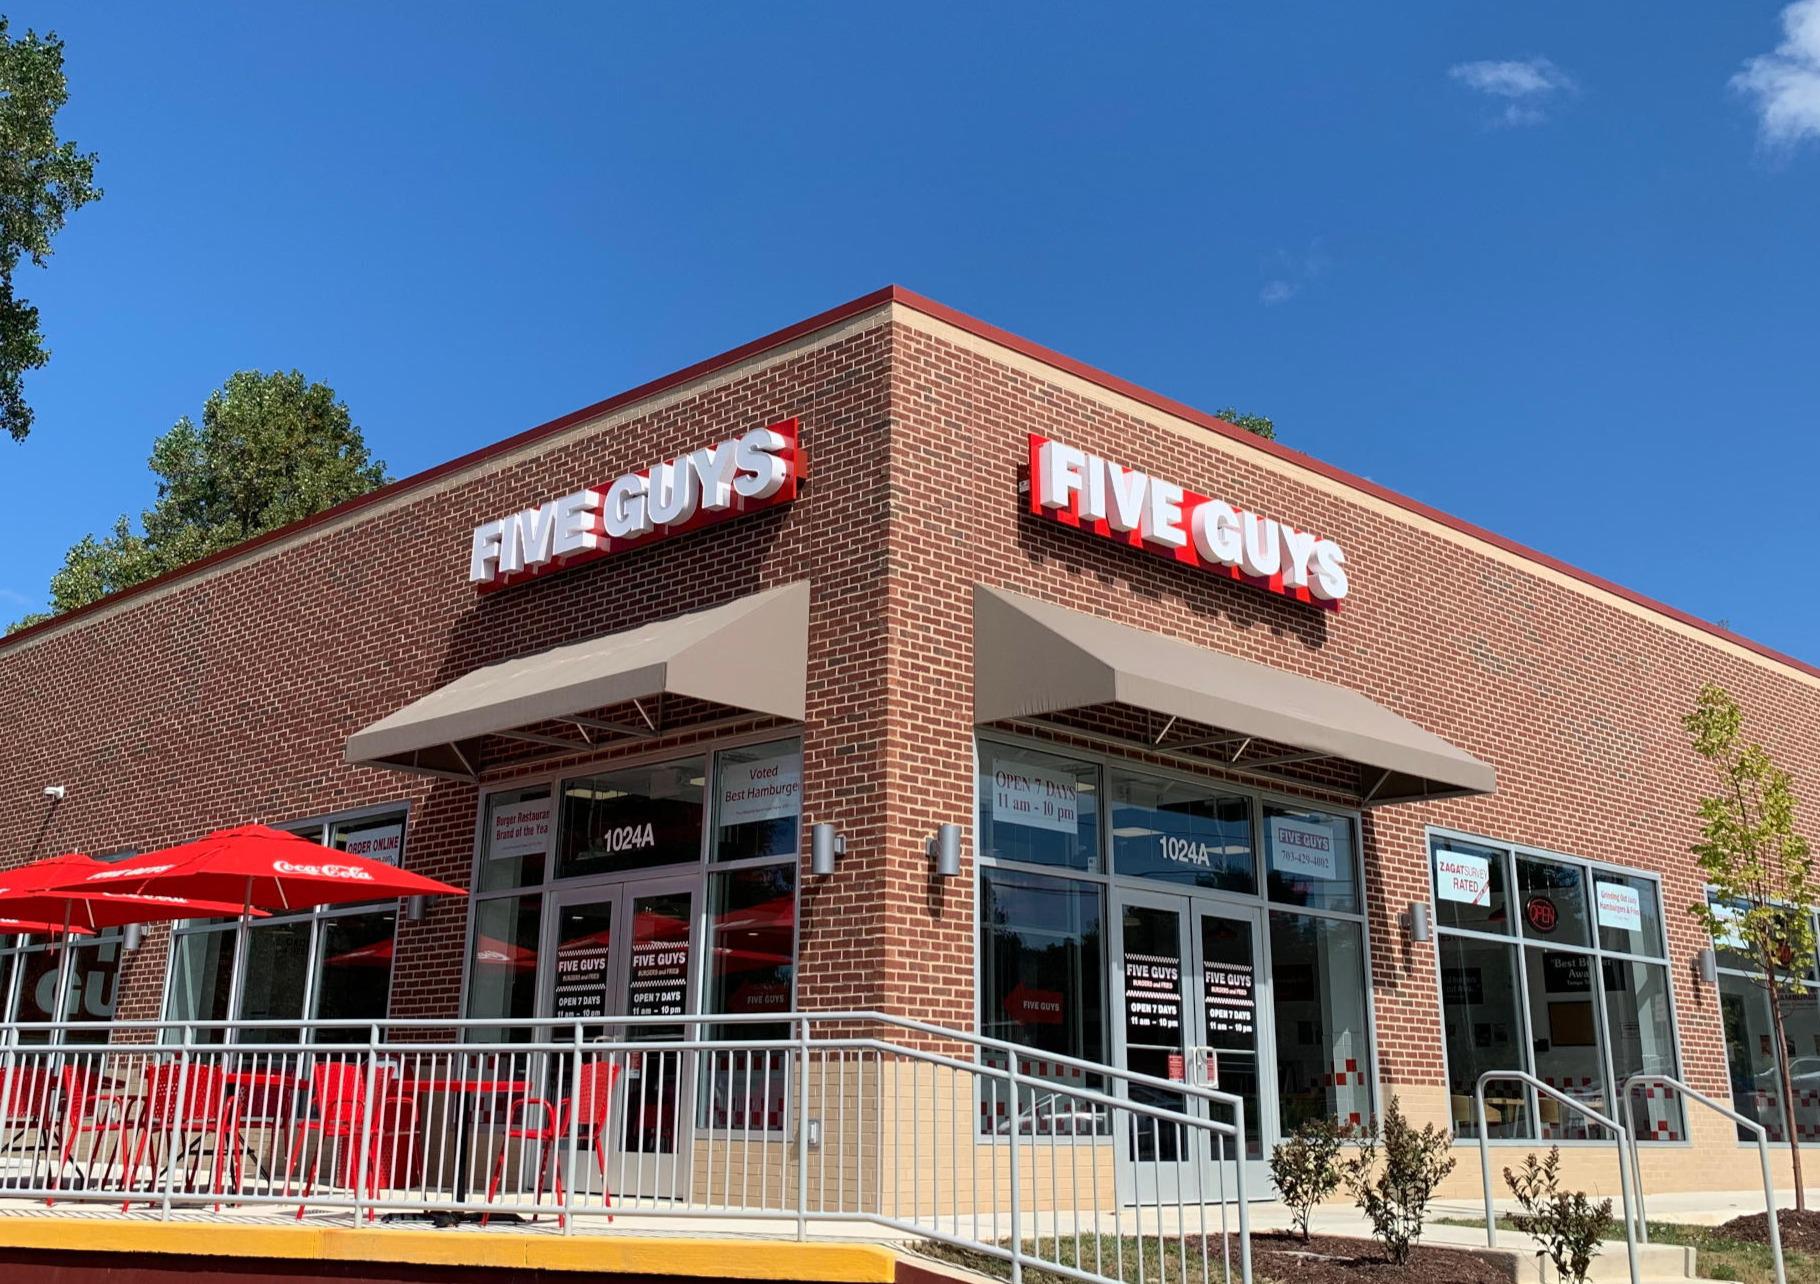 Exterior photograph of the entrance to the Five Guys restaurant at 1024 Seneca Road in Great Falls,  Five Guys Great Falls (703)429-4002